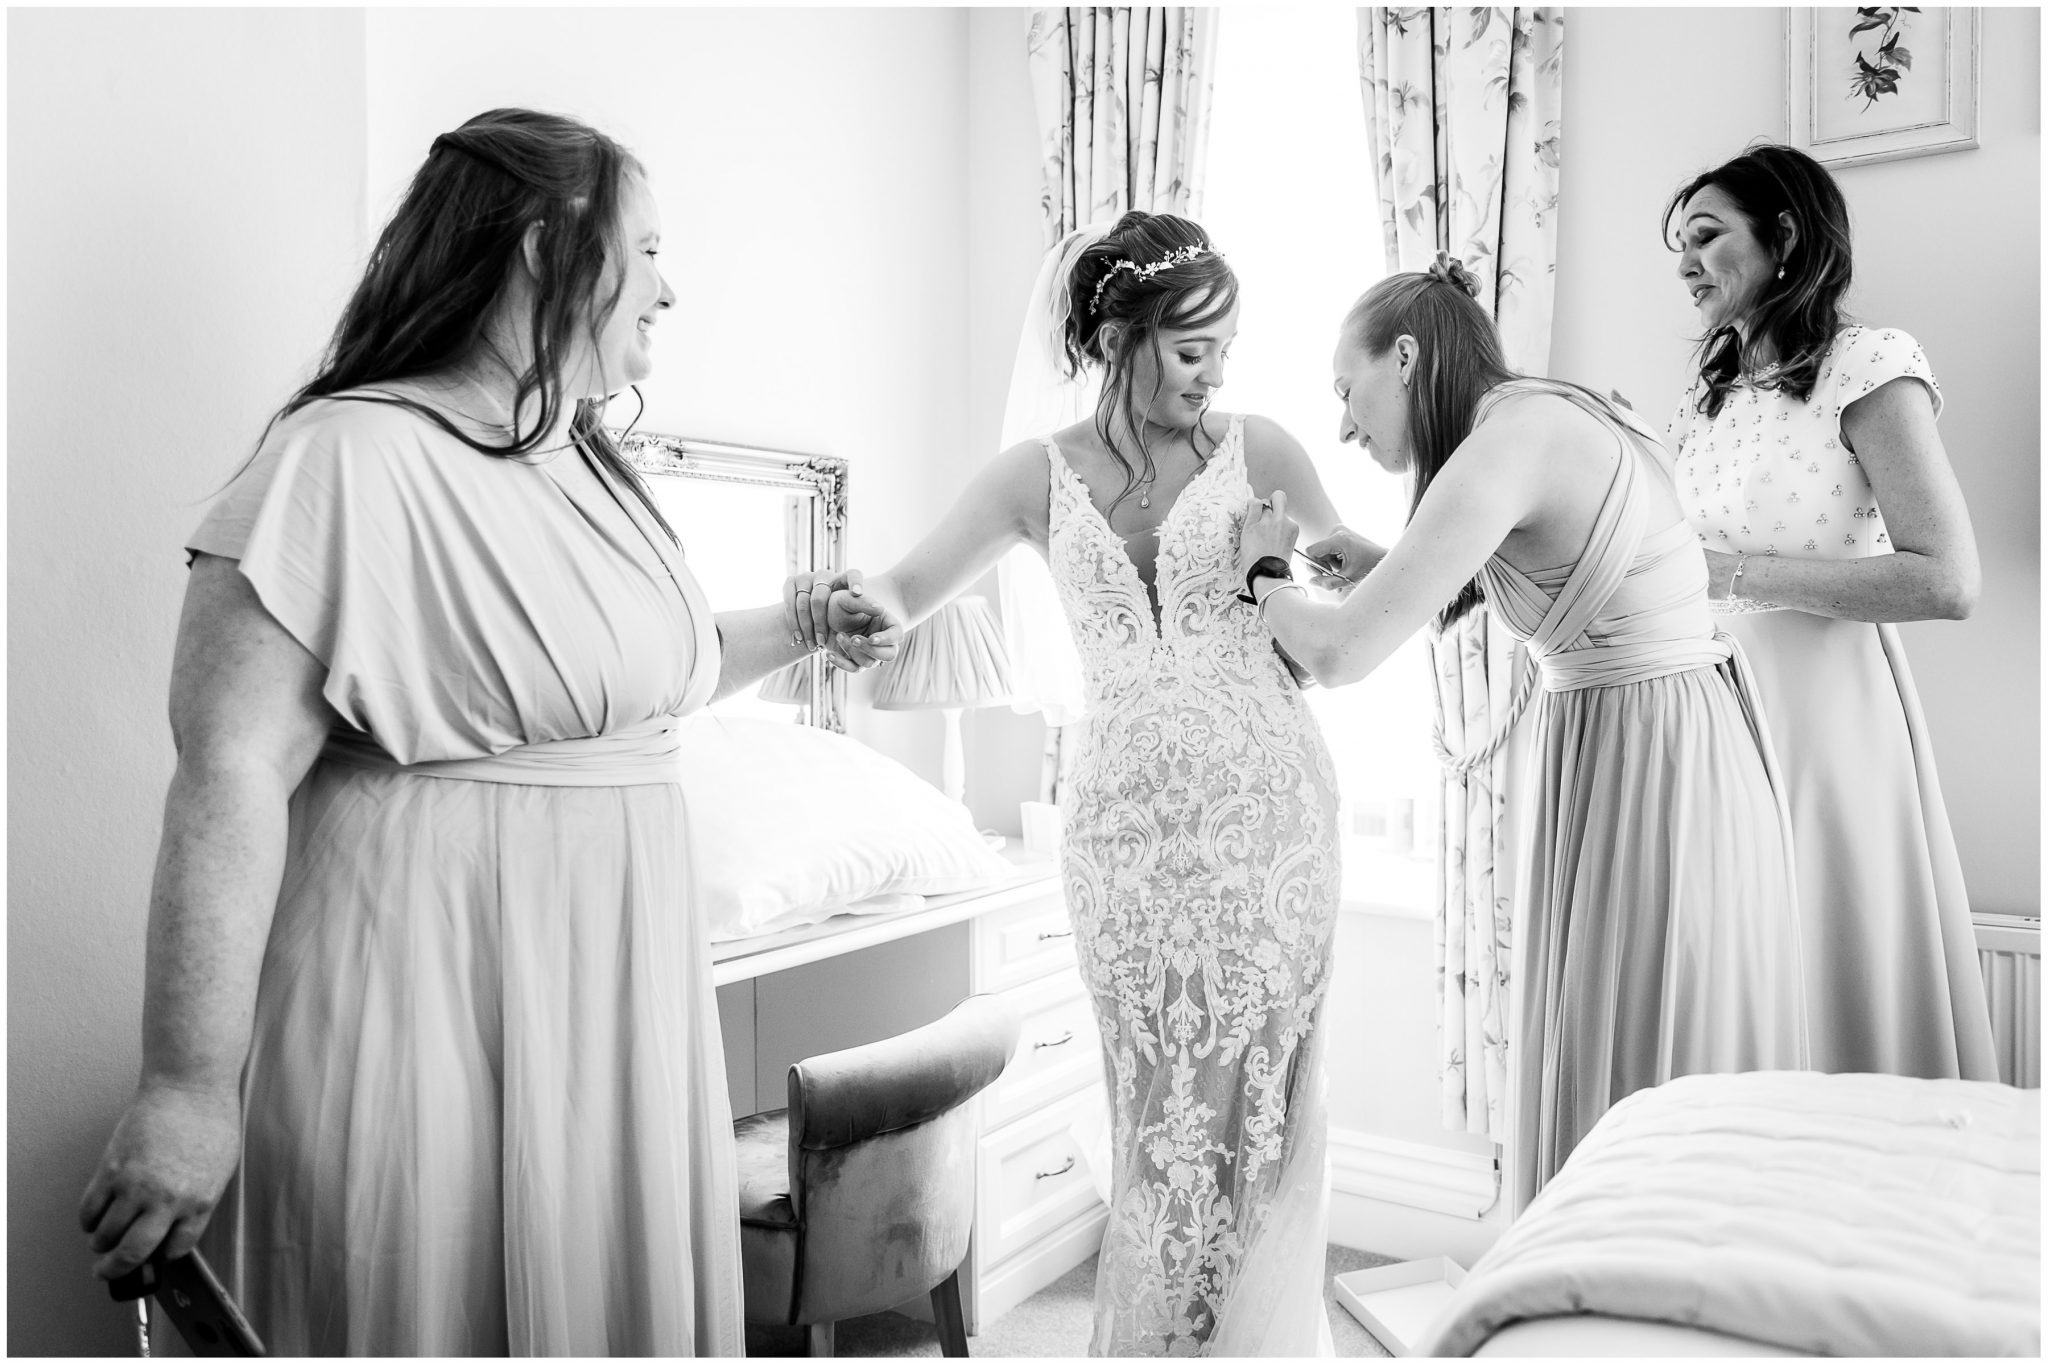 Bridesmaids help the bride get into her wedding dress black and white candid photography